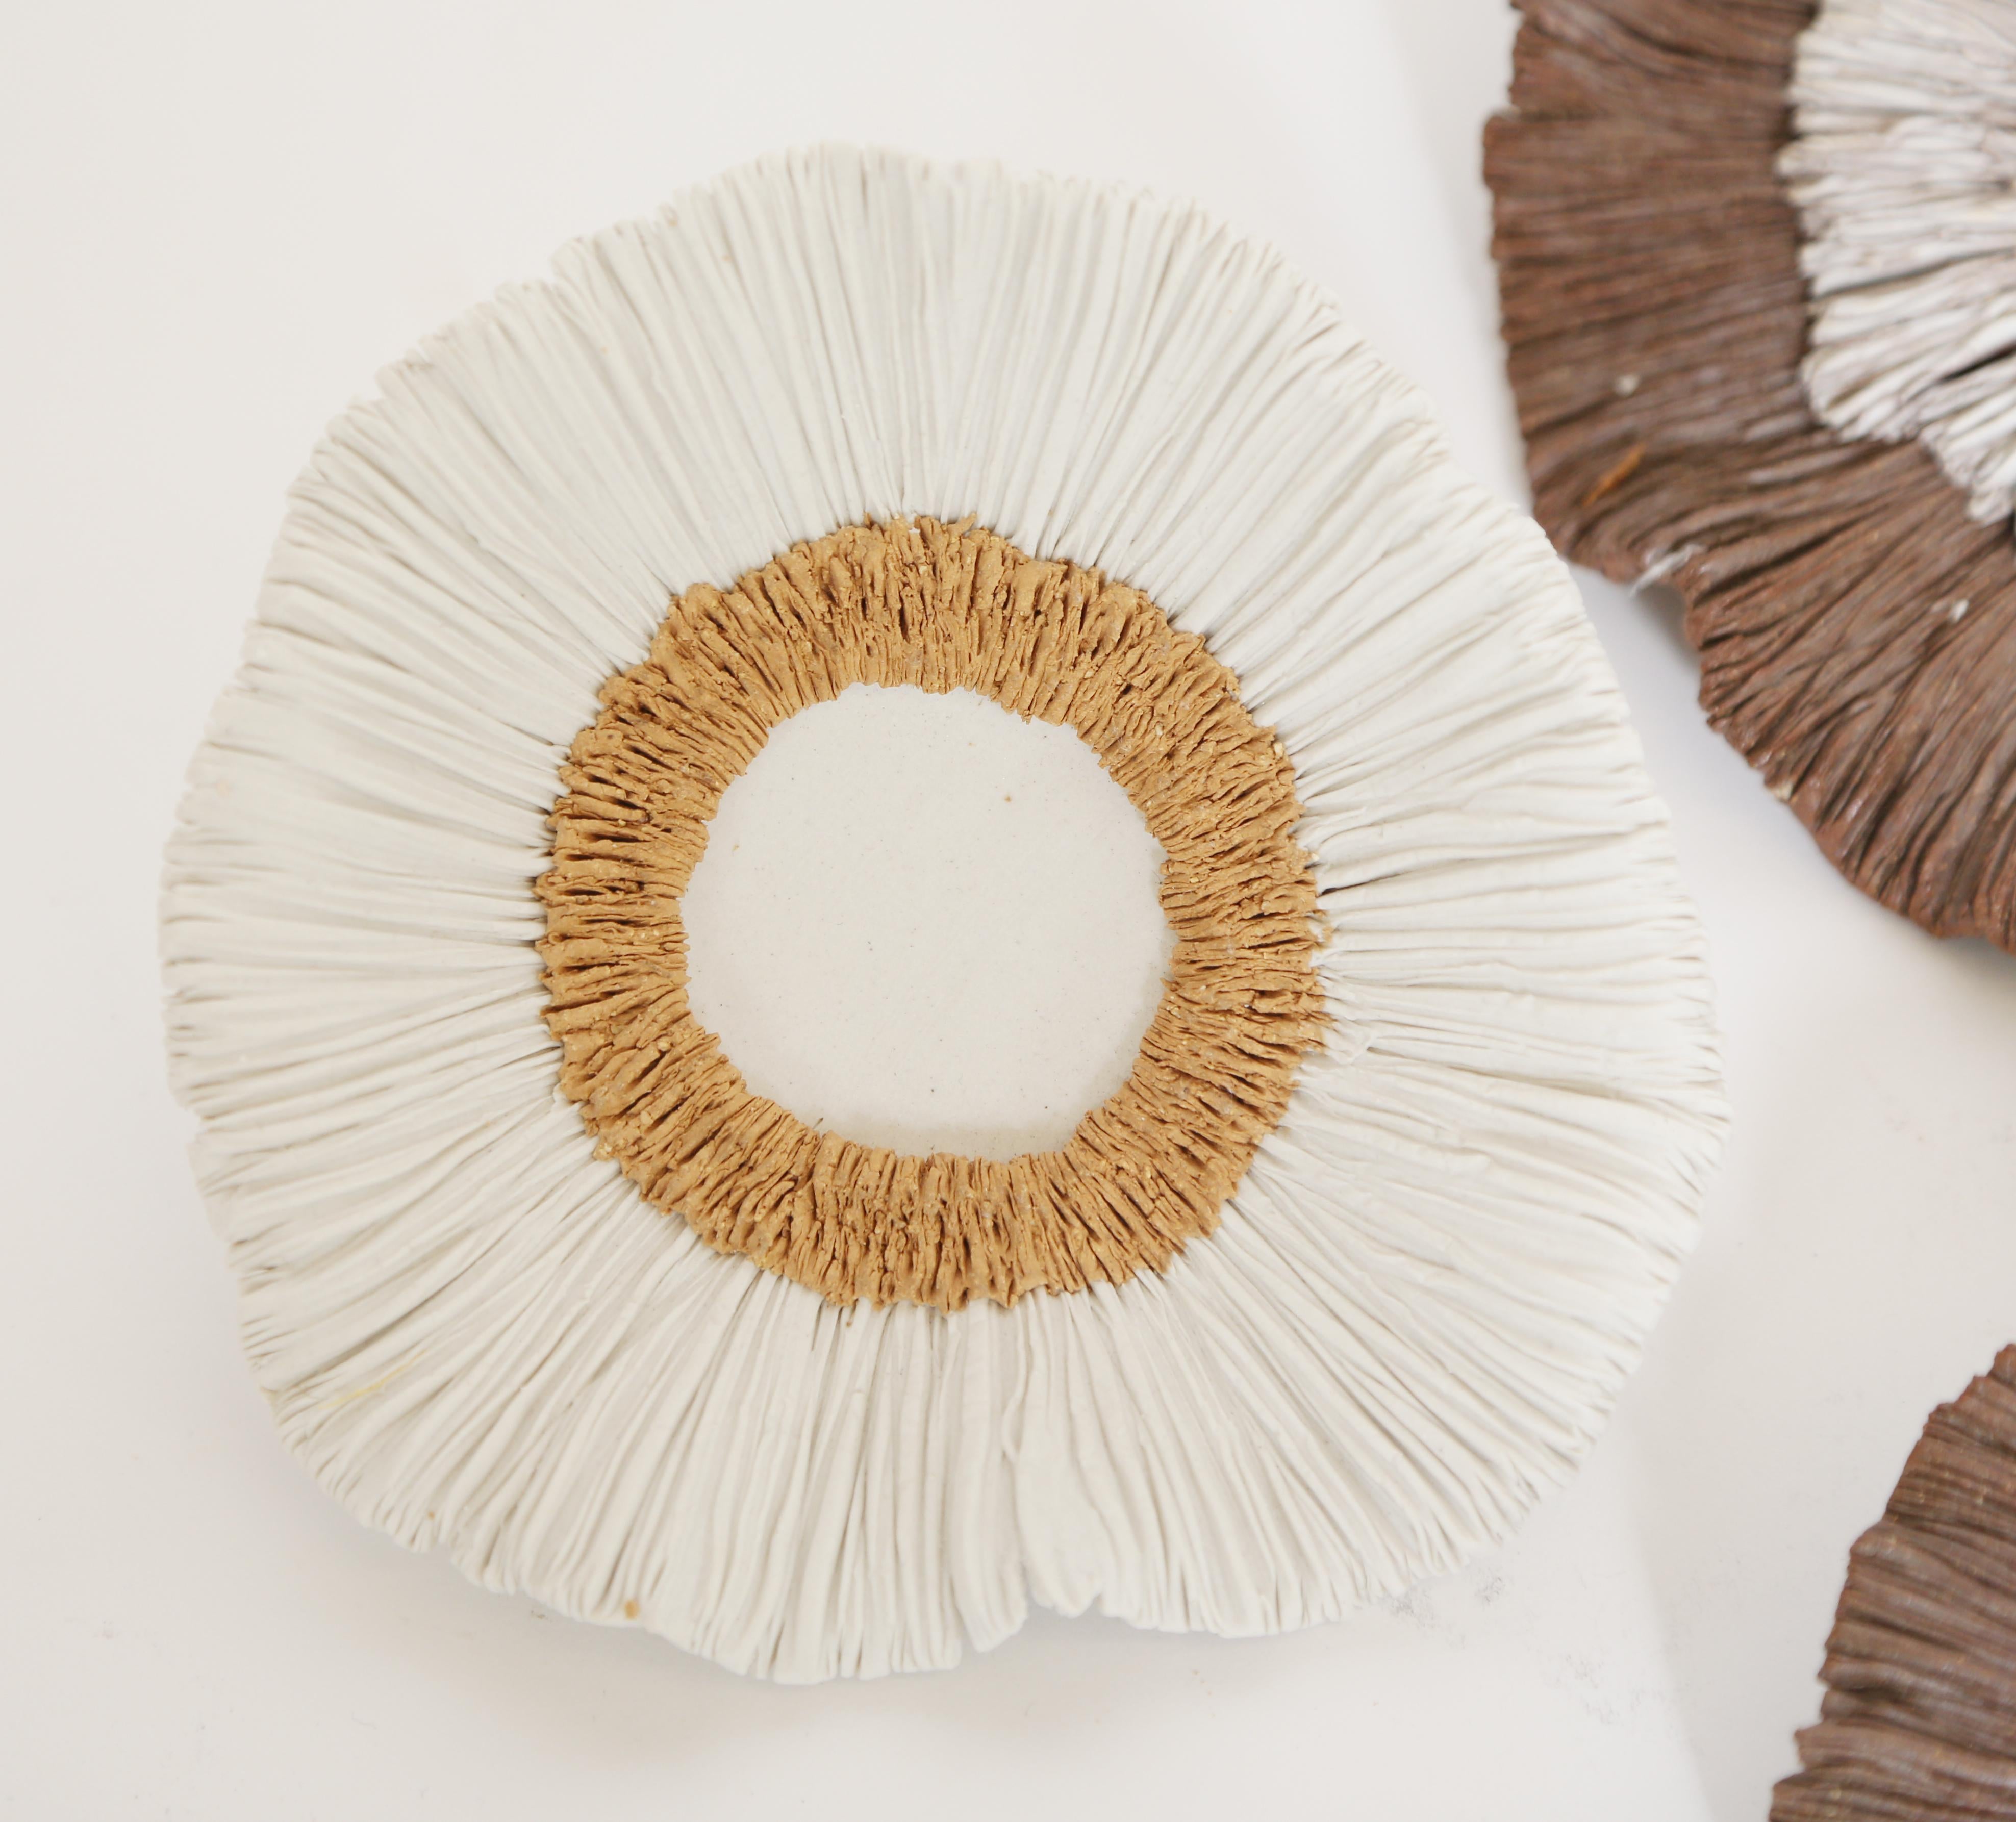 Created by a delicate hand, a sampling of our pure white or mixed warm toned porcelain and ceramic sea forms for your table. Each piece and intricate part is created by hand one at a time. They are the artist's image of dream like sea forms. They